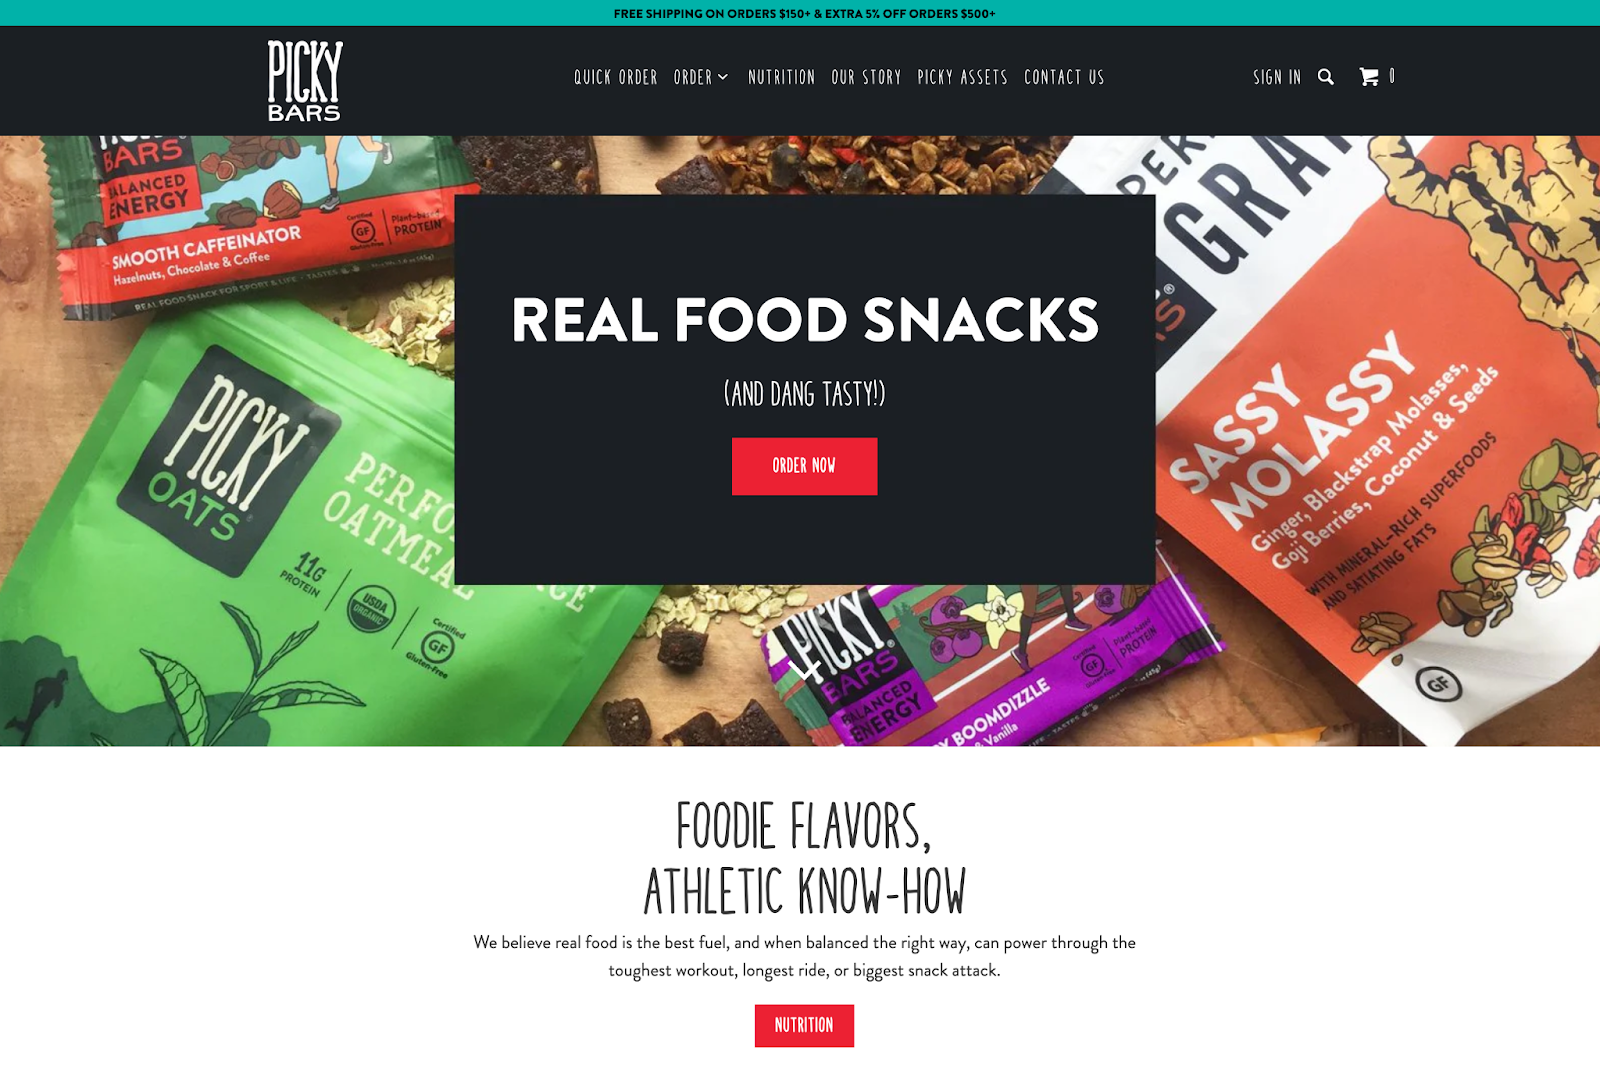 Hero image with colorful images, large “Real food snacks” test, and an “Order now” call-to-action